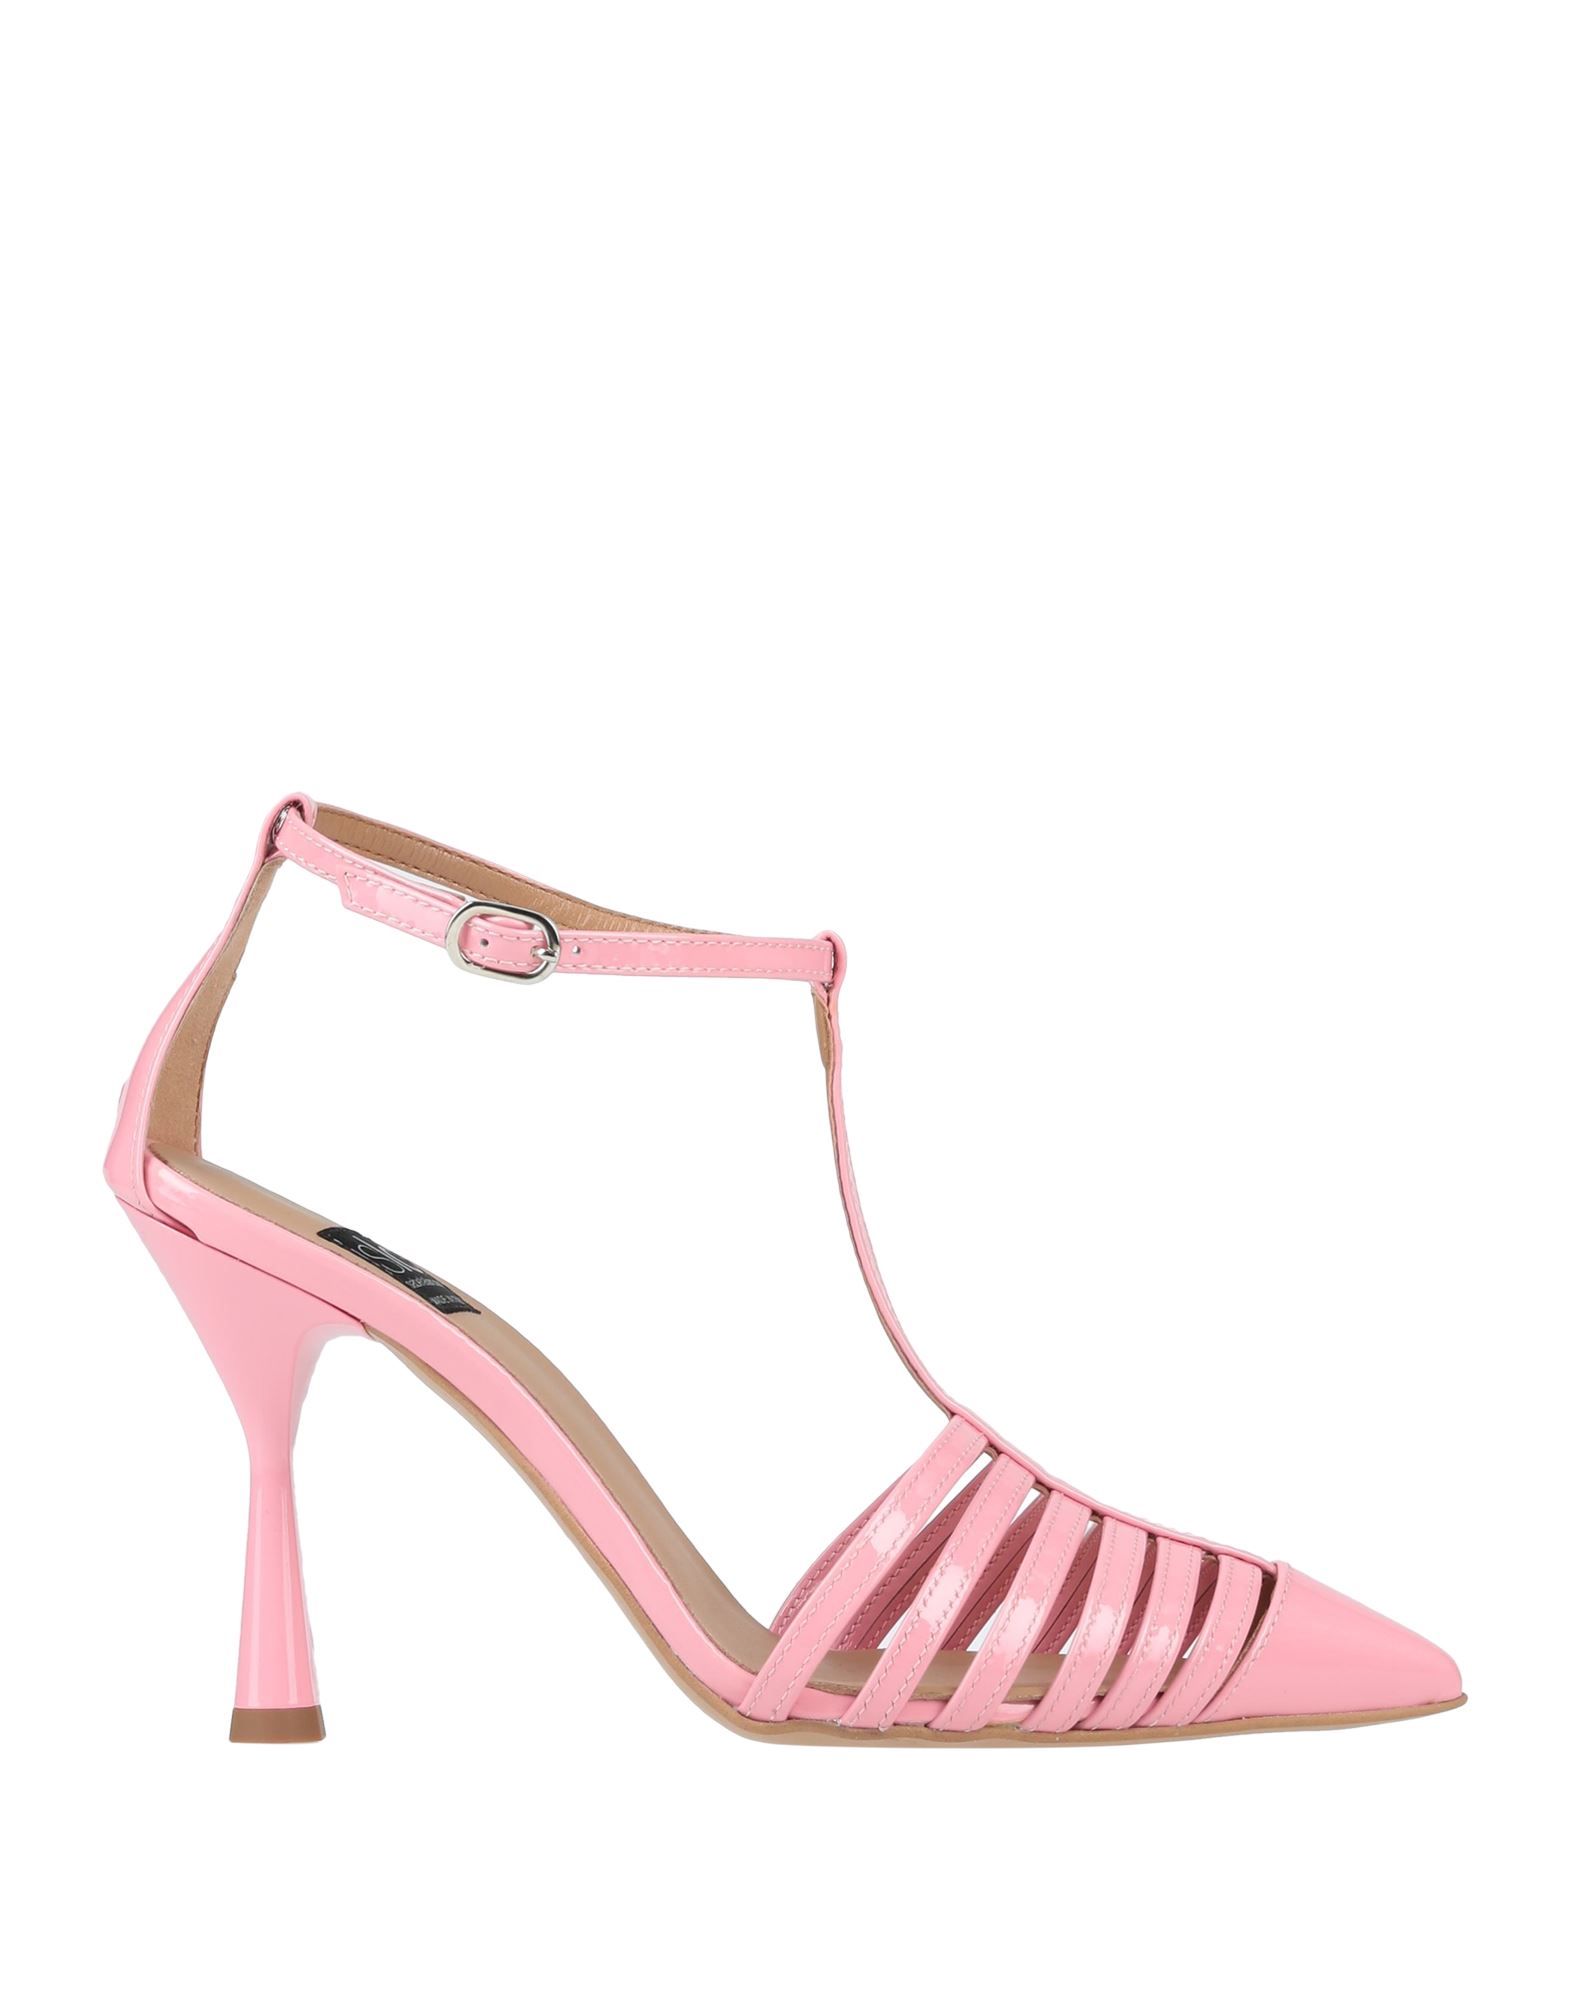 Islo Isabella Lorusso Pumps In Pink